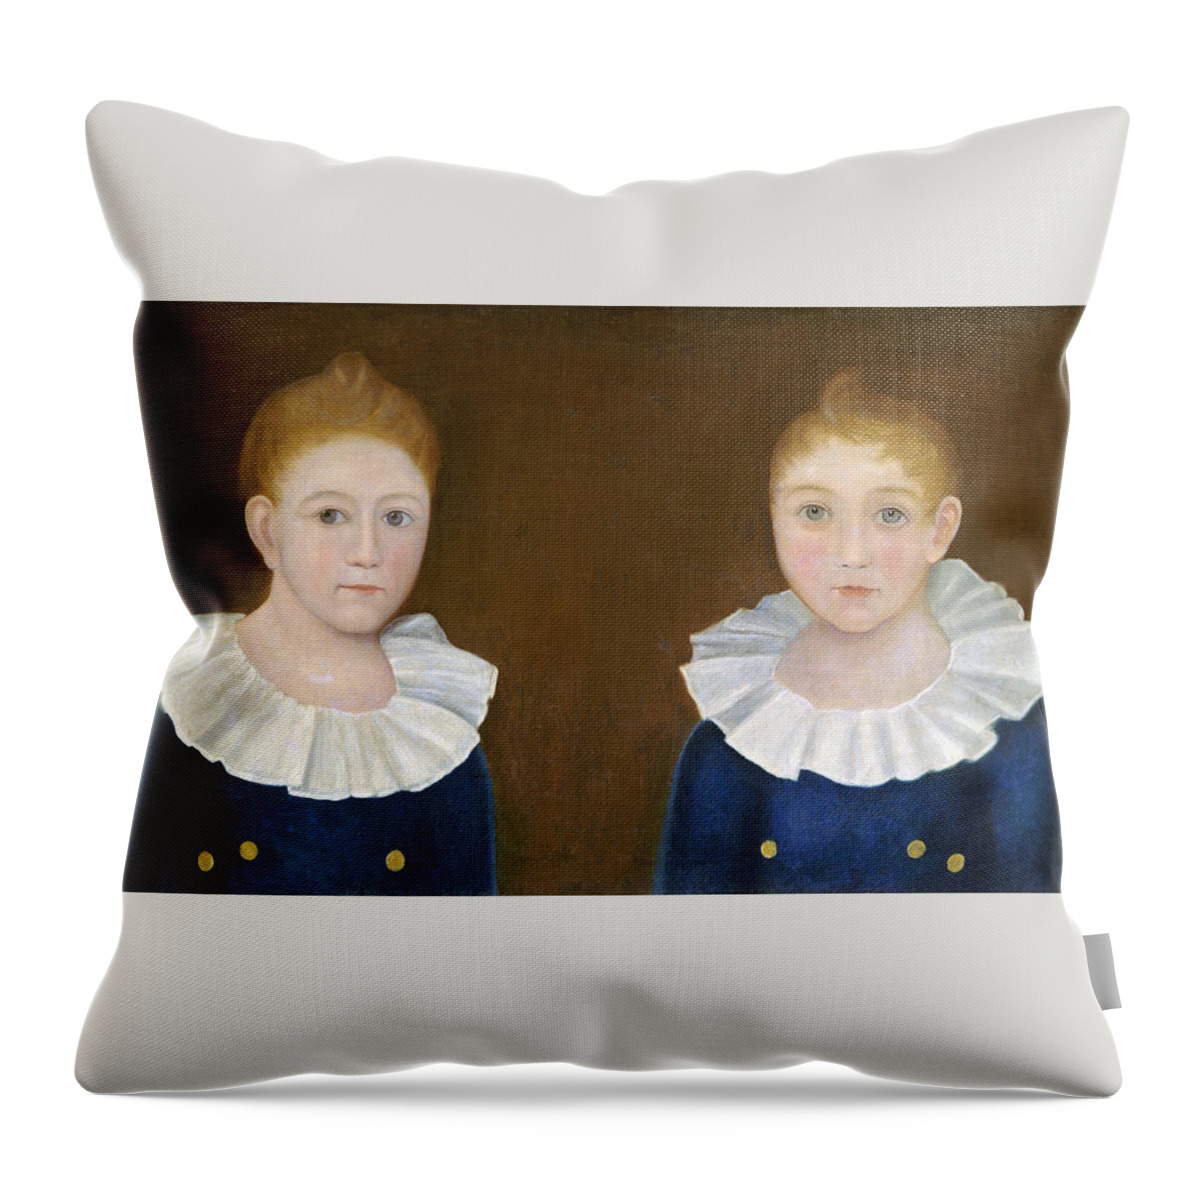 Art Throw Pillow featuring the painting The Congdon Brothers #1 by American 19th Century